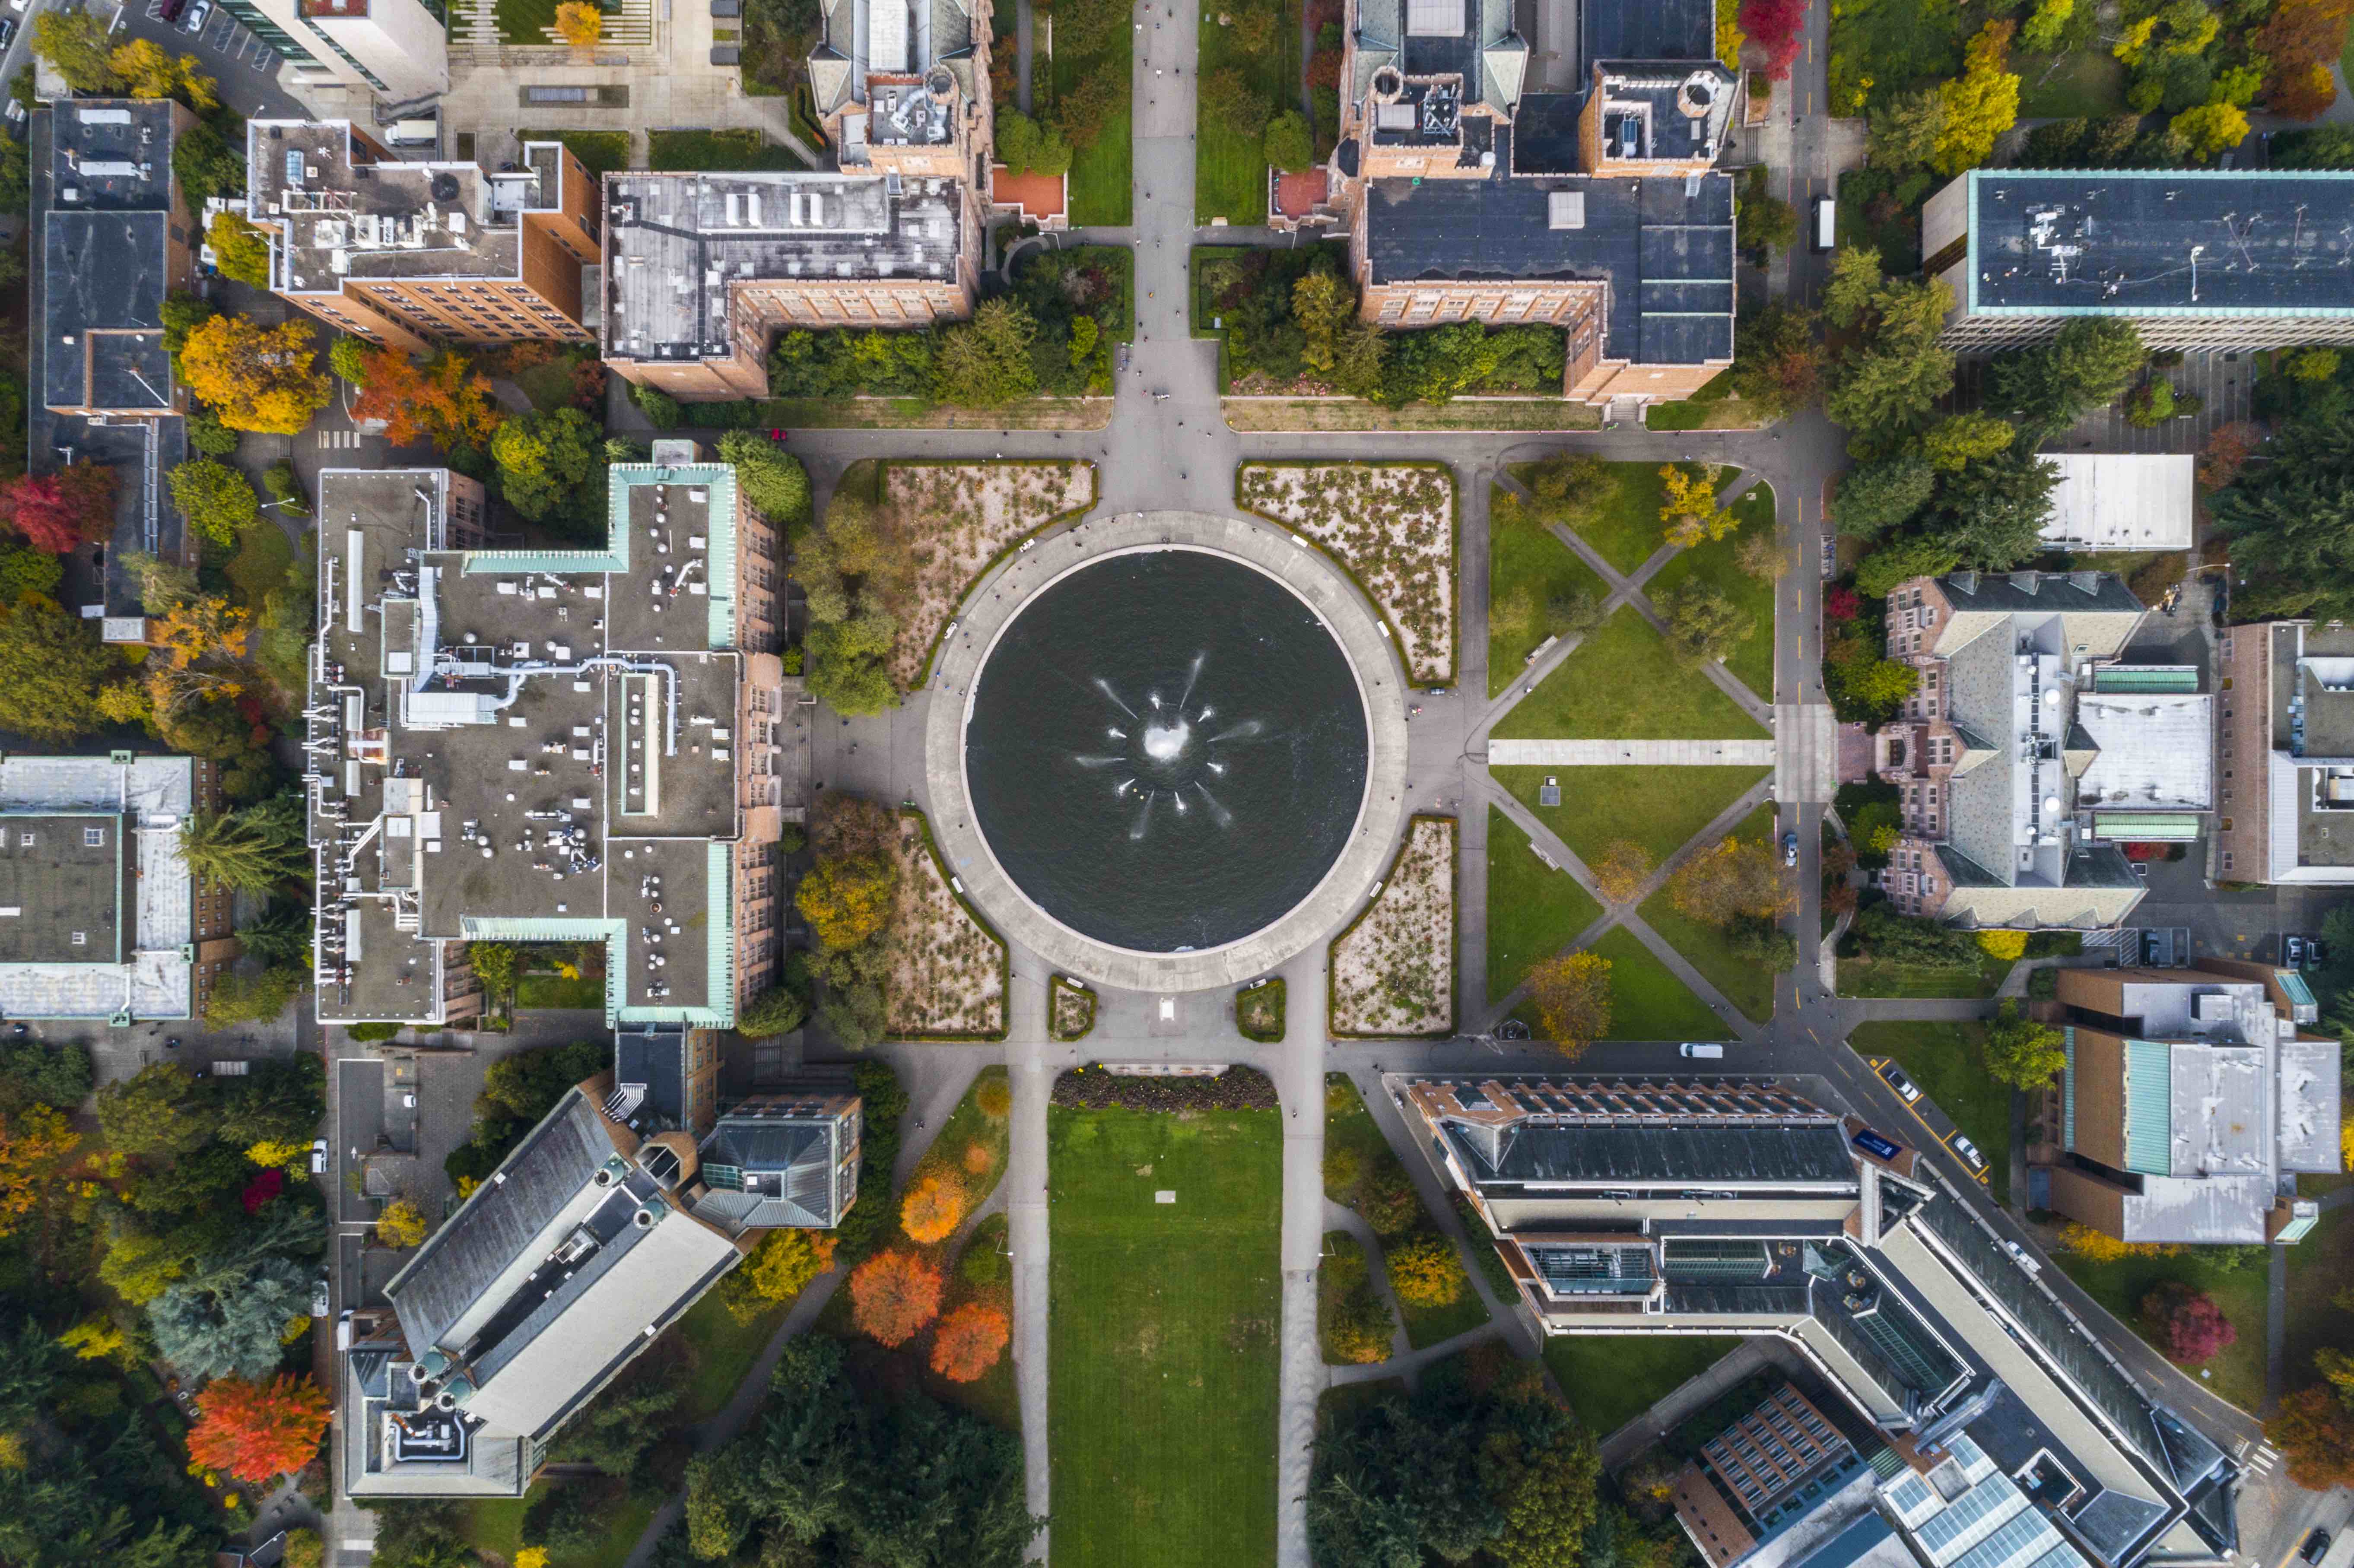 An arial view of the University of Washington campus featuring Drumheller Fountain in the middle